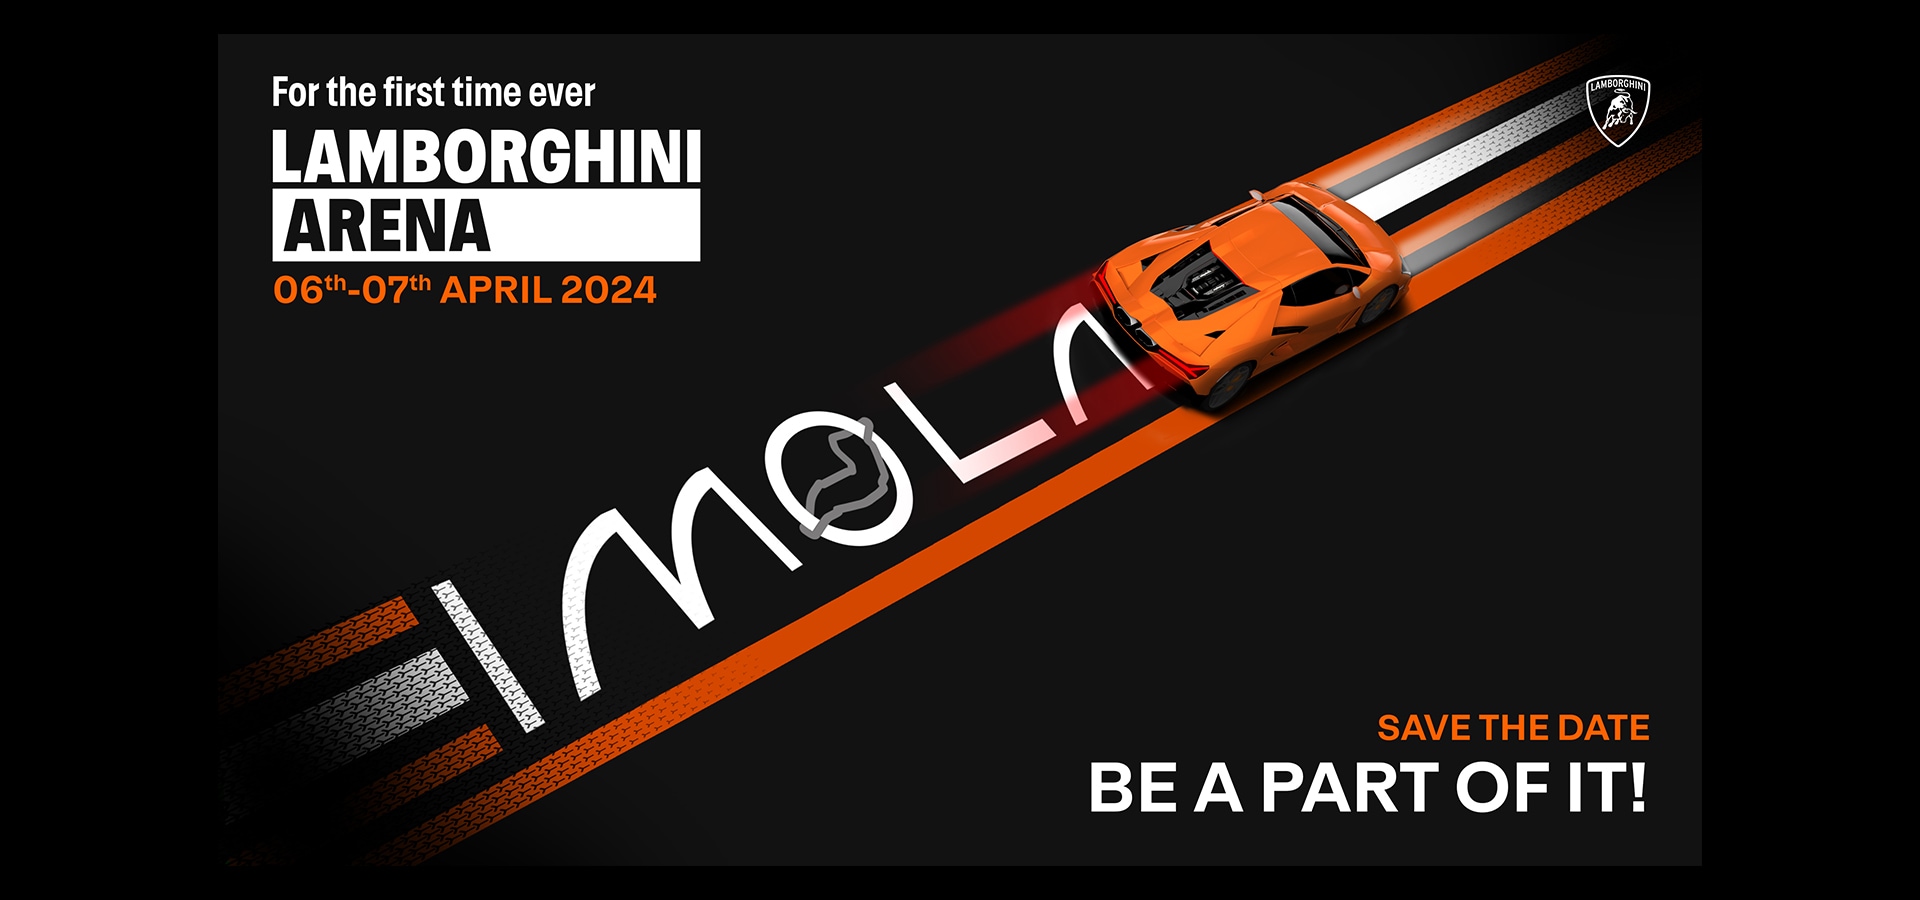 Lamborghini Arena: the most extraordinary event in our brand's history is coming